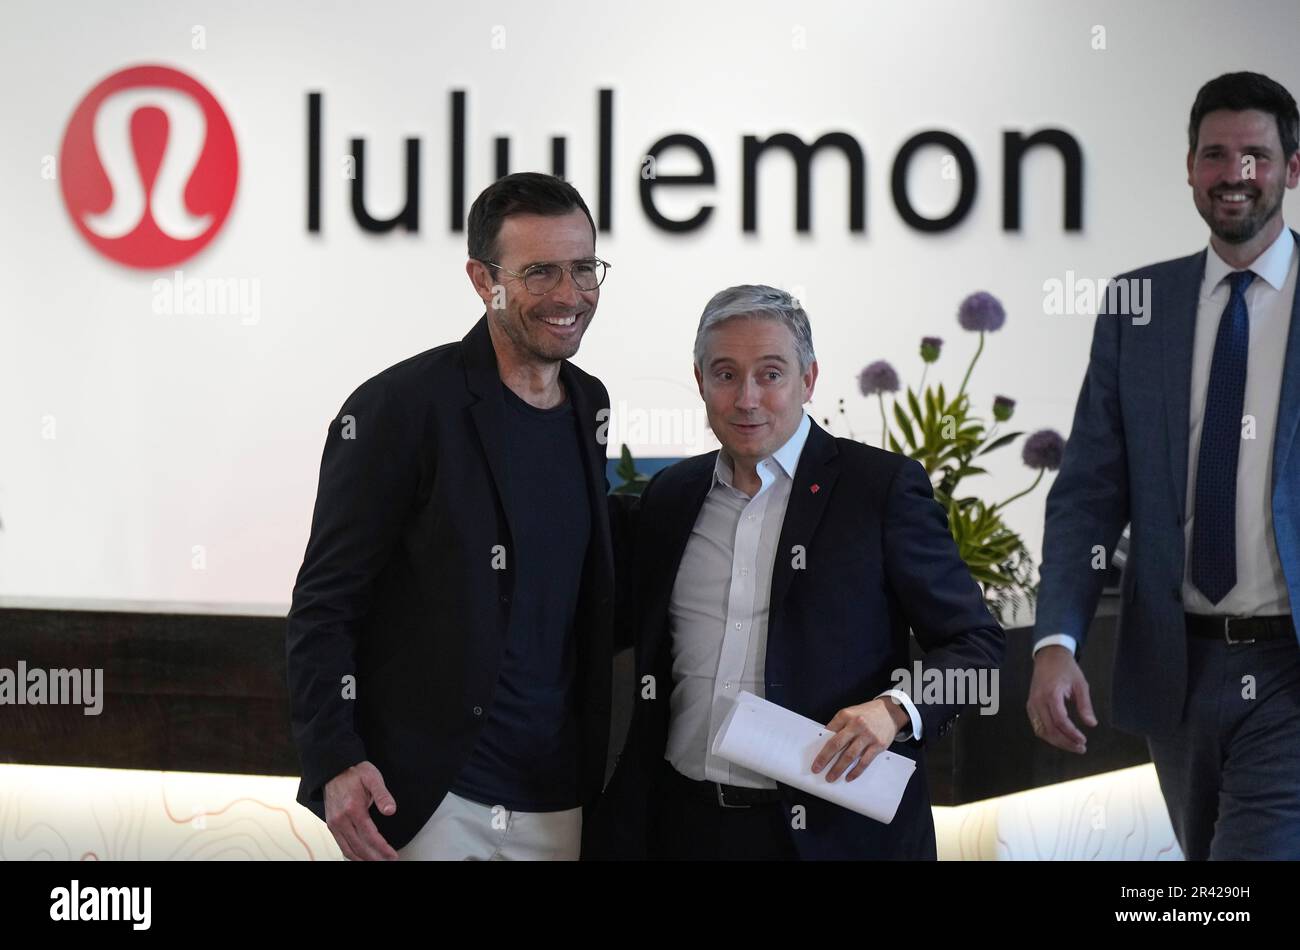 https://c8.alamy.com/comp/2R4290H/lululemon-ceo-calvin-mcdonald-left-minister-of-innovation-science-and-industry-francois-philippe-champagne-center-and-minister-of-immigration-refugees-and-citizenship-sean-fraser-arrive-for-a-news-conference-at-the-companys-headquarters-in-vancouver-on-thursday-may-25-2023-the-company-has-received-a-waiver-from-immigration-rules-restricting-access-to-foreign-workers-as-it-expands-its-global-headquarters-with-plans-to-hire-2600-additional-workers-over-the-next-five-years-darryl-dyckthe-canadian-press-via-ap-2R4290H.jpg